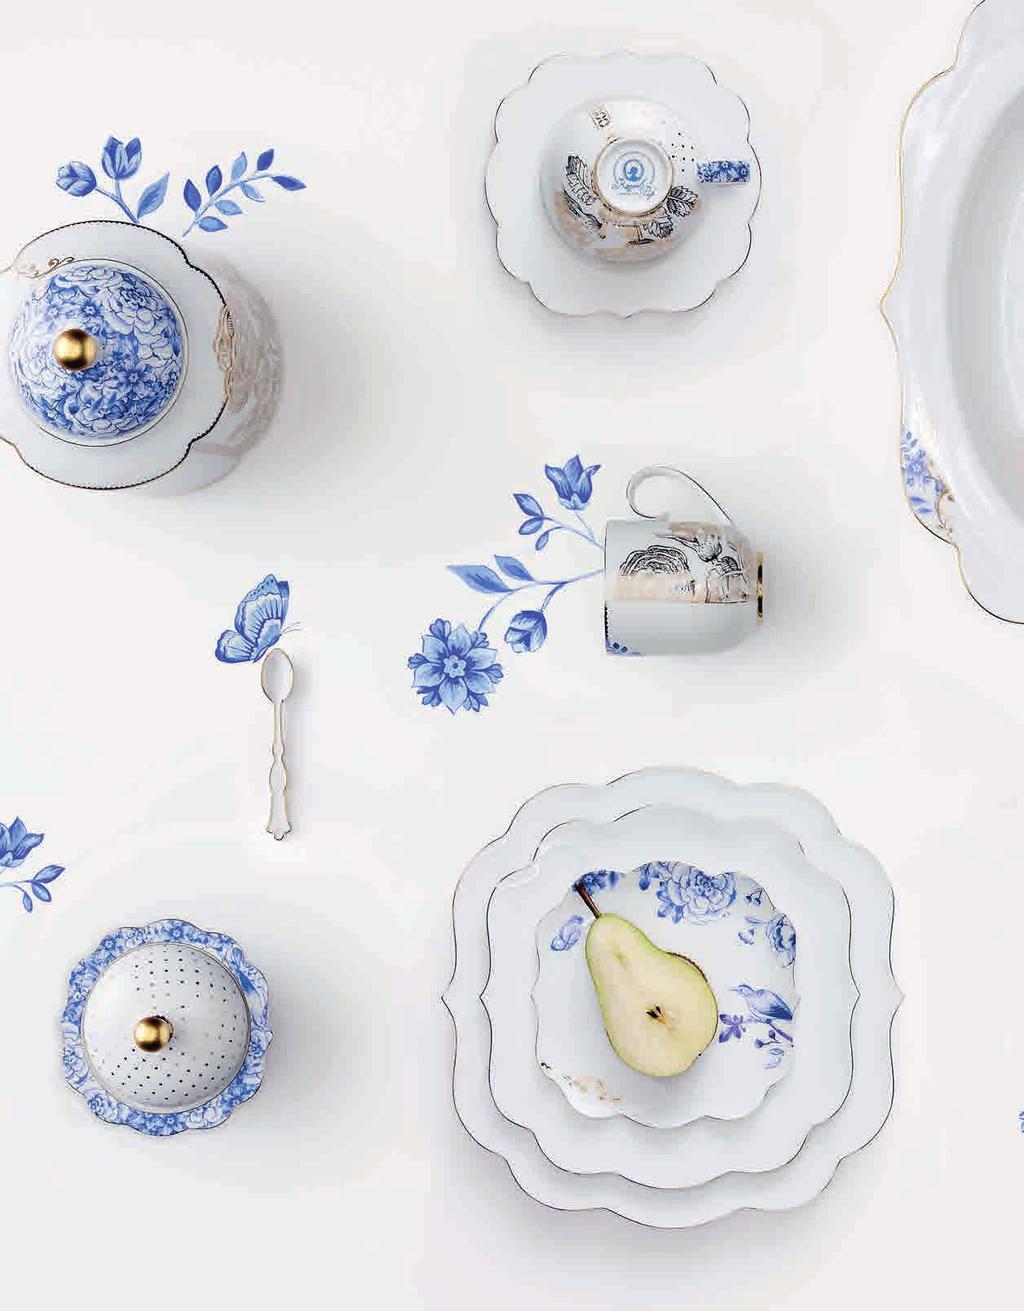 golden floral scenes, alternating with golden graphic elements, all of which are also found in the Royal tableware collection.